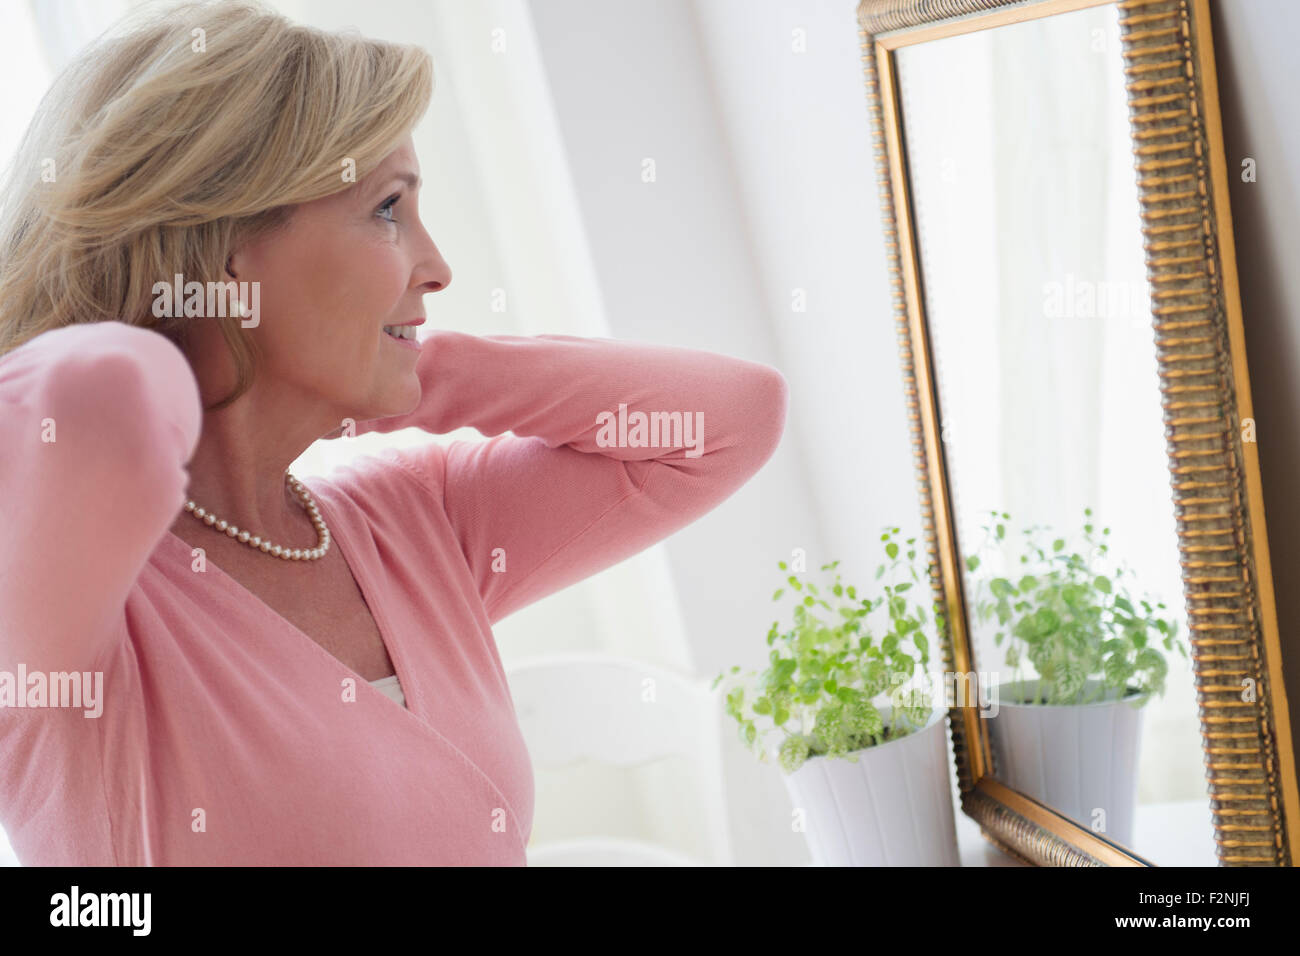 Caucasian woman admiring Herself in mirror Banque D'Images